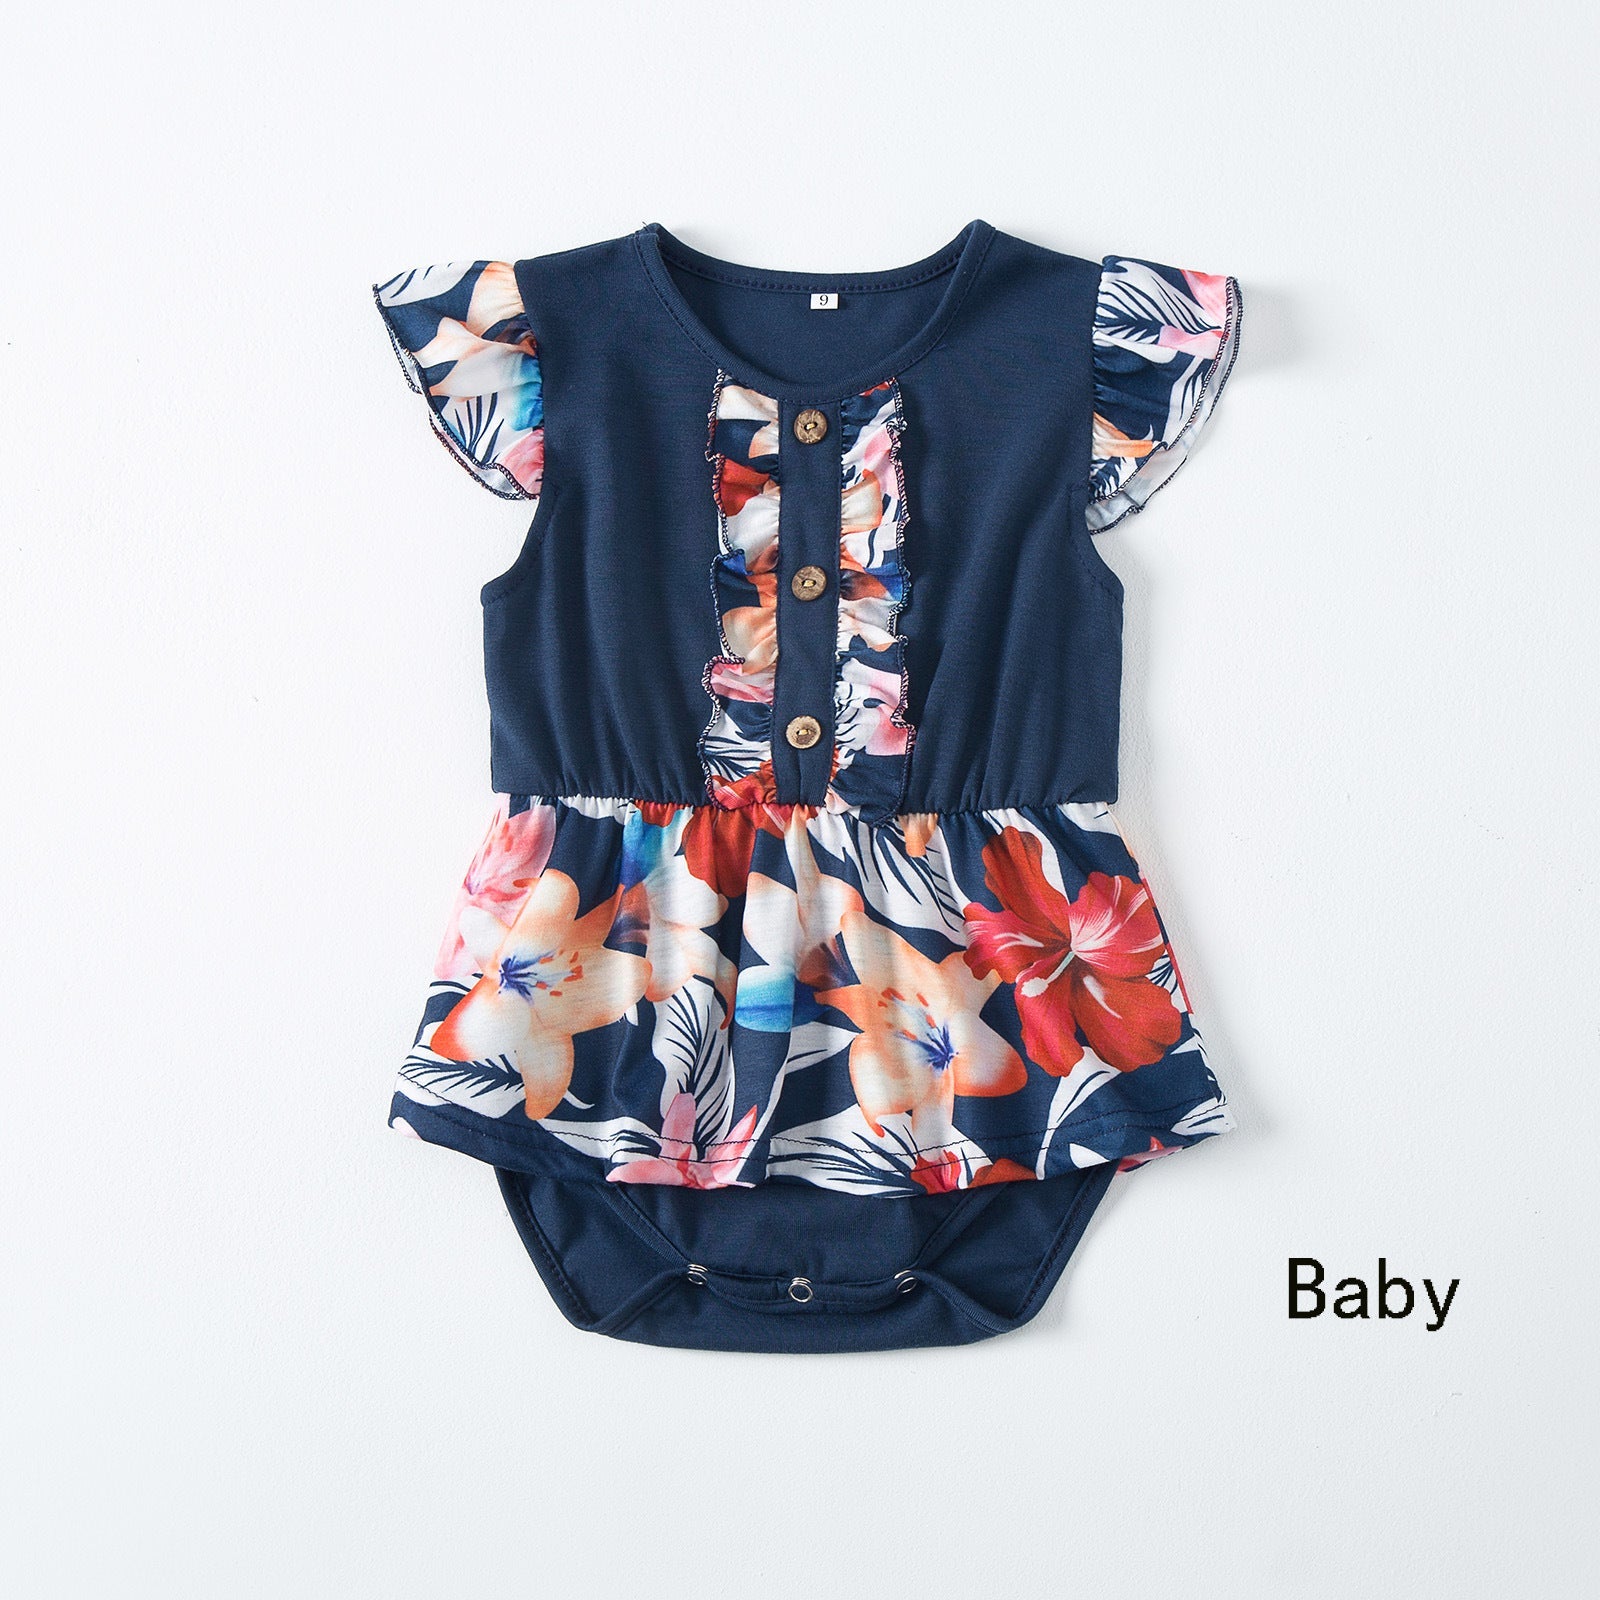 Family Matching Floral Print Splicing Dark Blue Dresses and T-shirts Sets